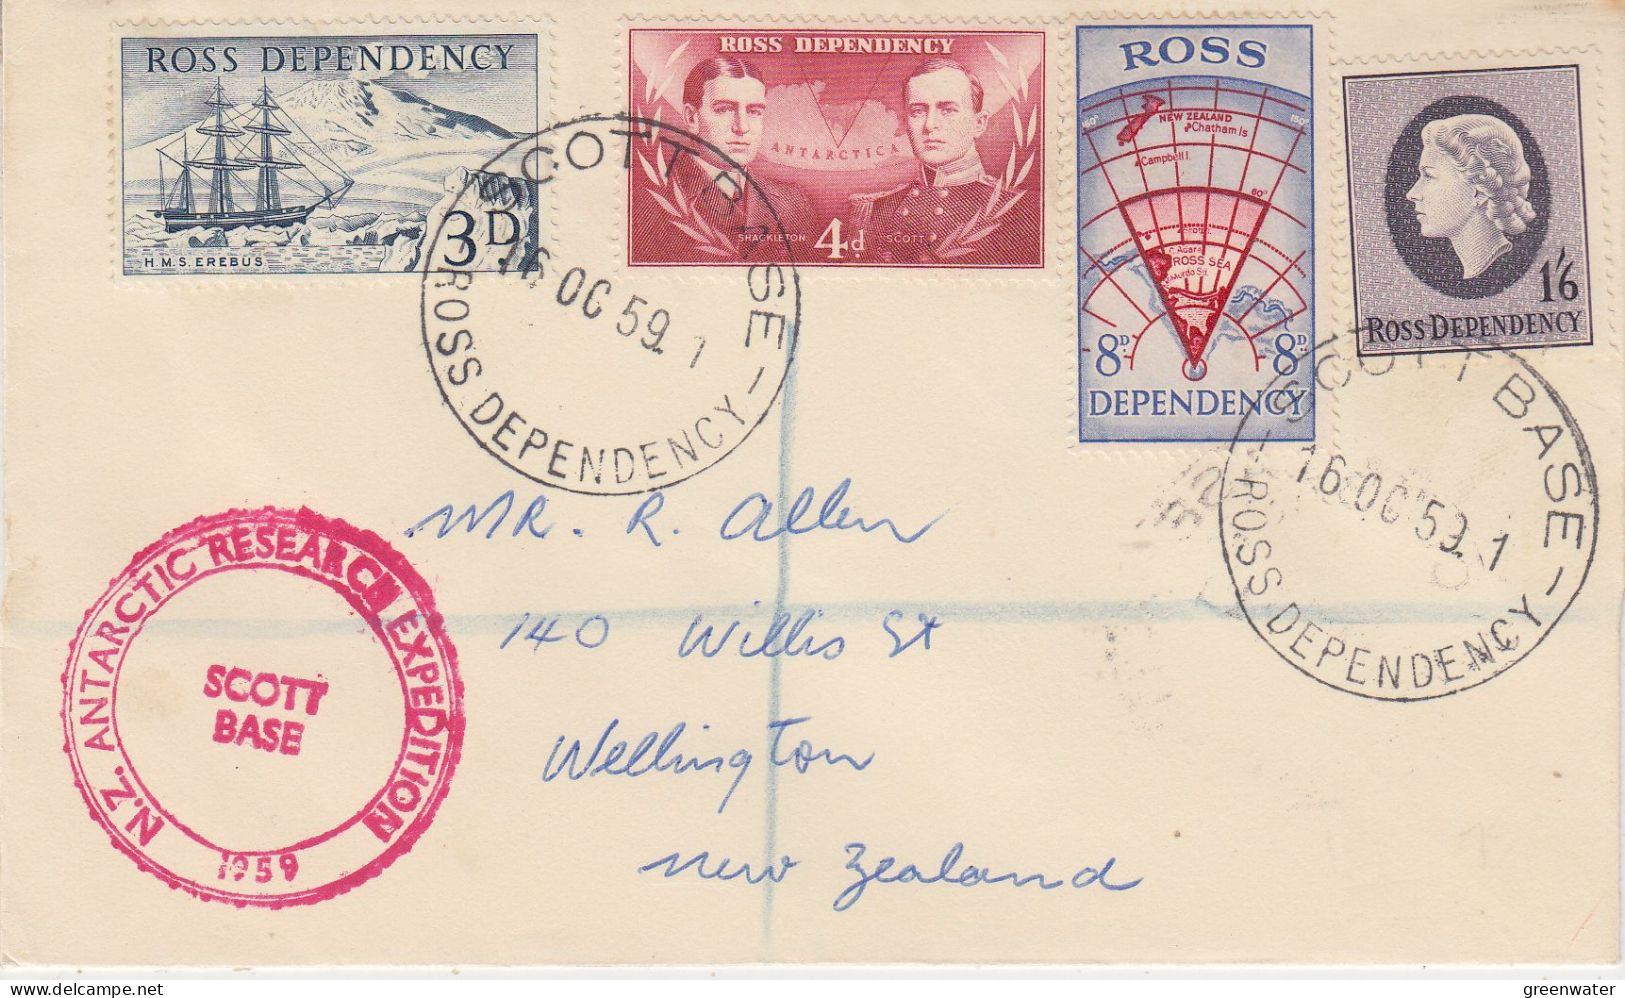 Ross Dependency 1959 NZ Antarctic Research Expedition Registered Cover  Ca Scott Base 16 OCT 1959 (SO235) - Lettres & Documents